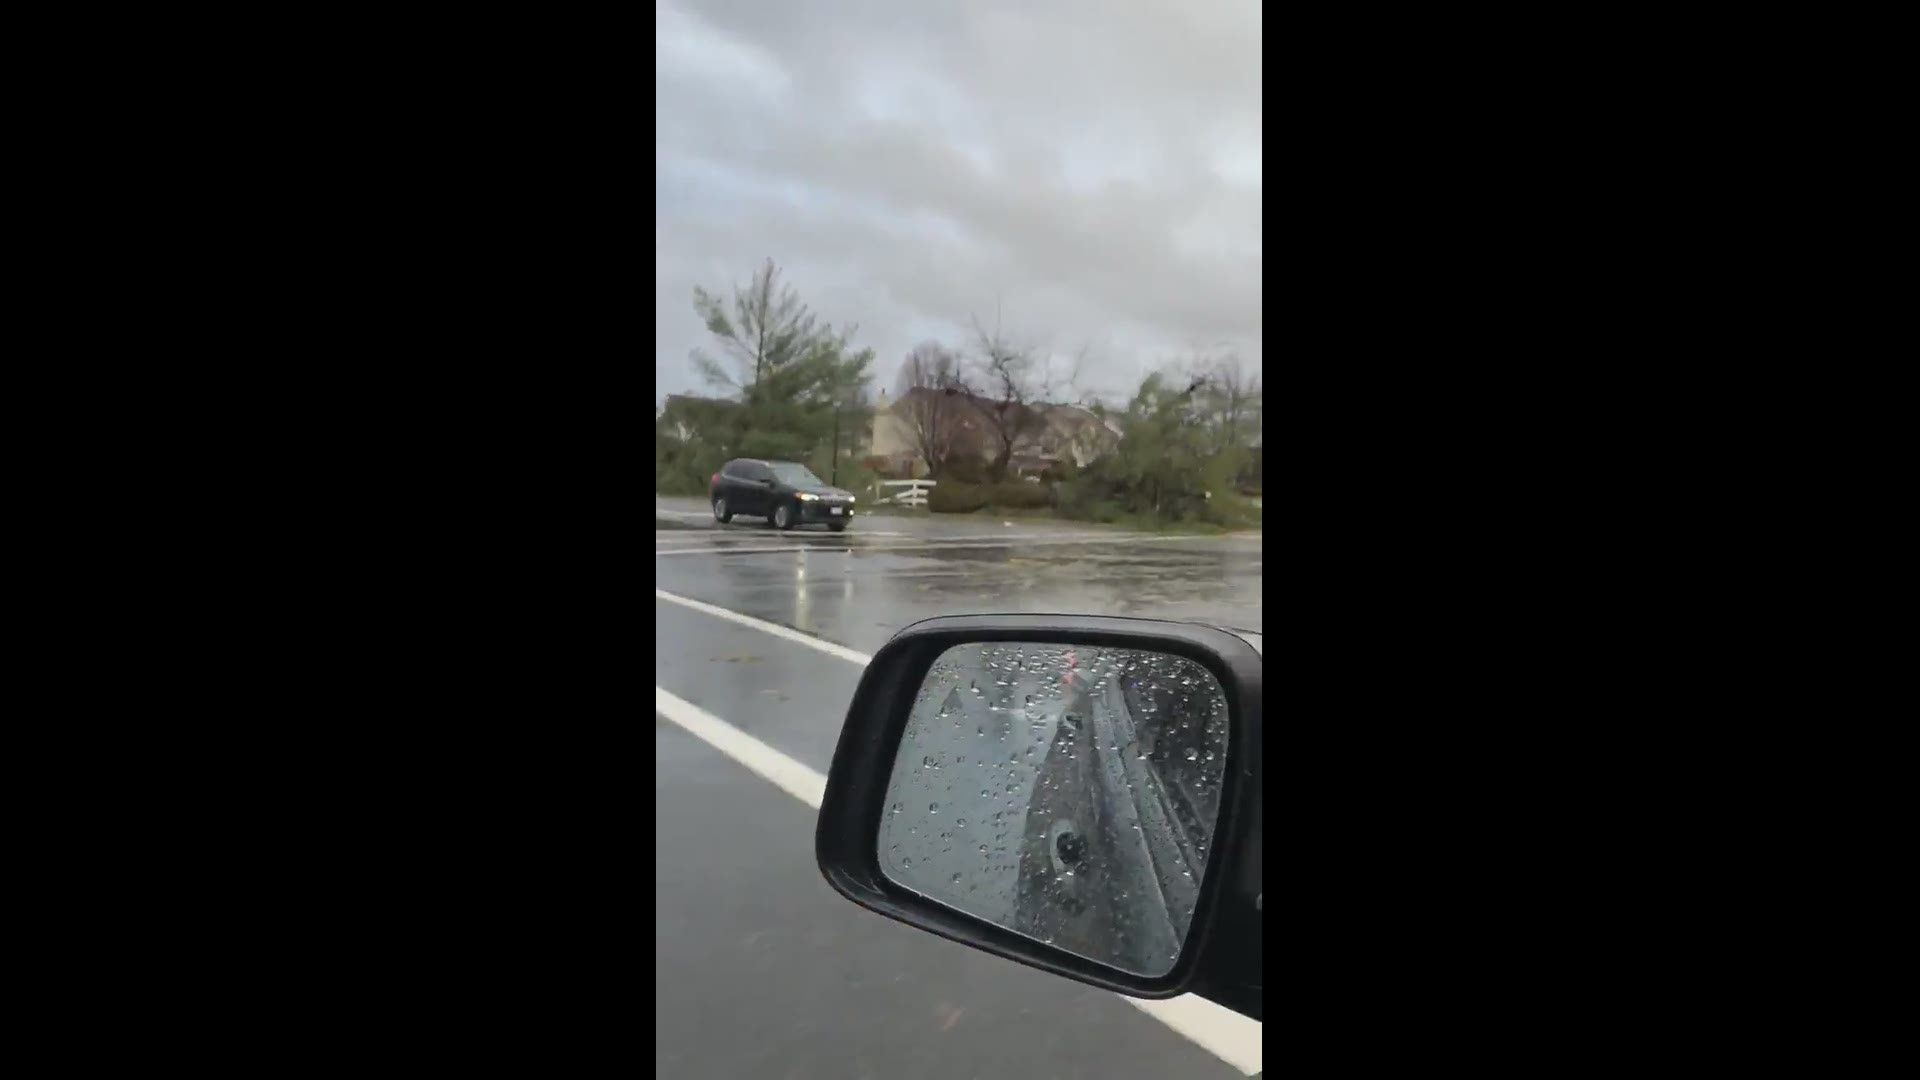 Video from a Twitter user in Leesburg, Virginia showed the tornado aftermath damage on the roads. Courtesy: @TaxBases, Twitter.